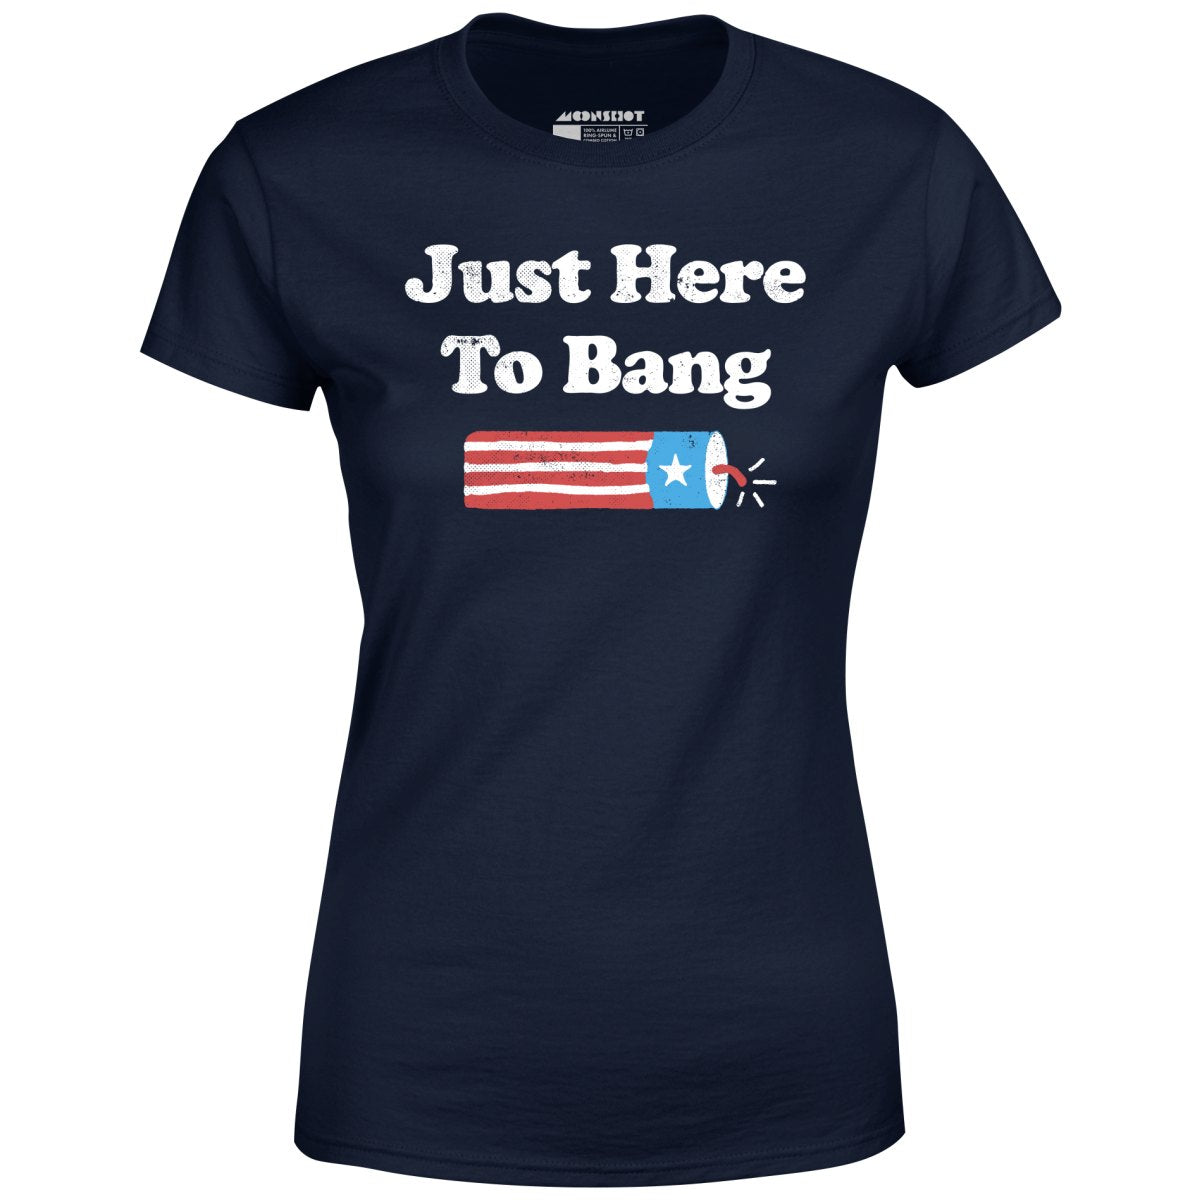 Just Here to Bang - Women's T-Shirt